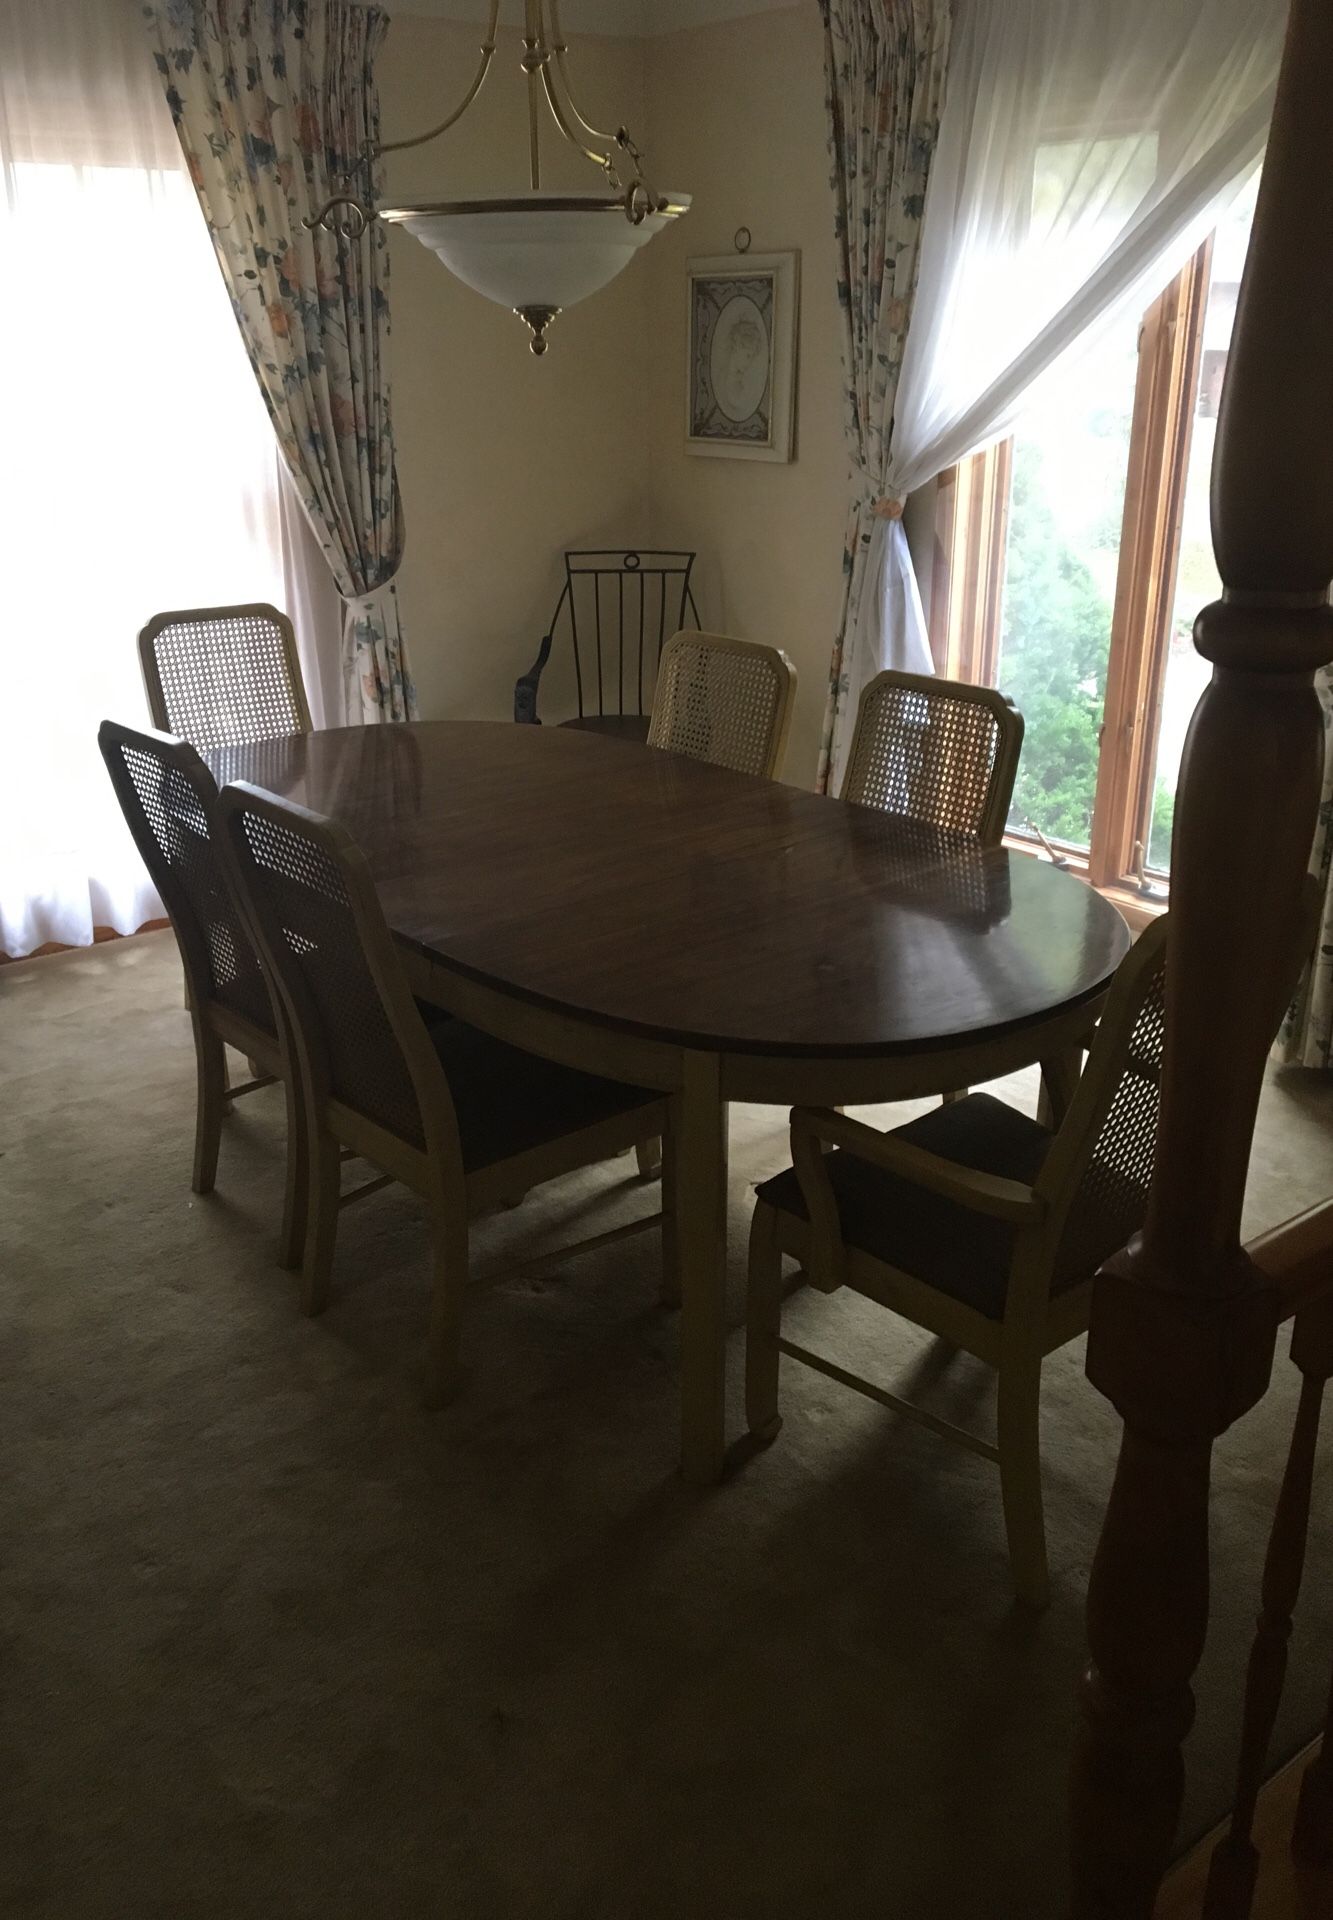 Breakfast kitchen dining table chairs hutch